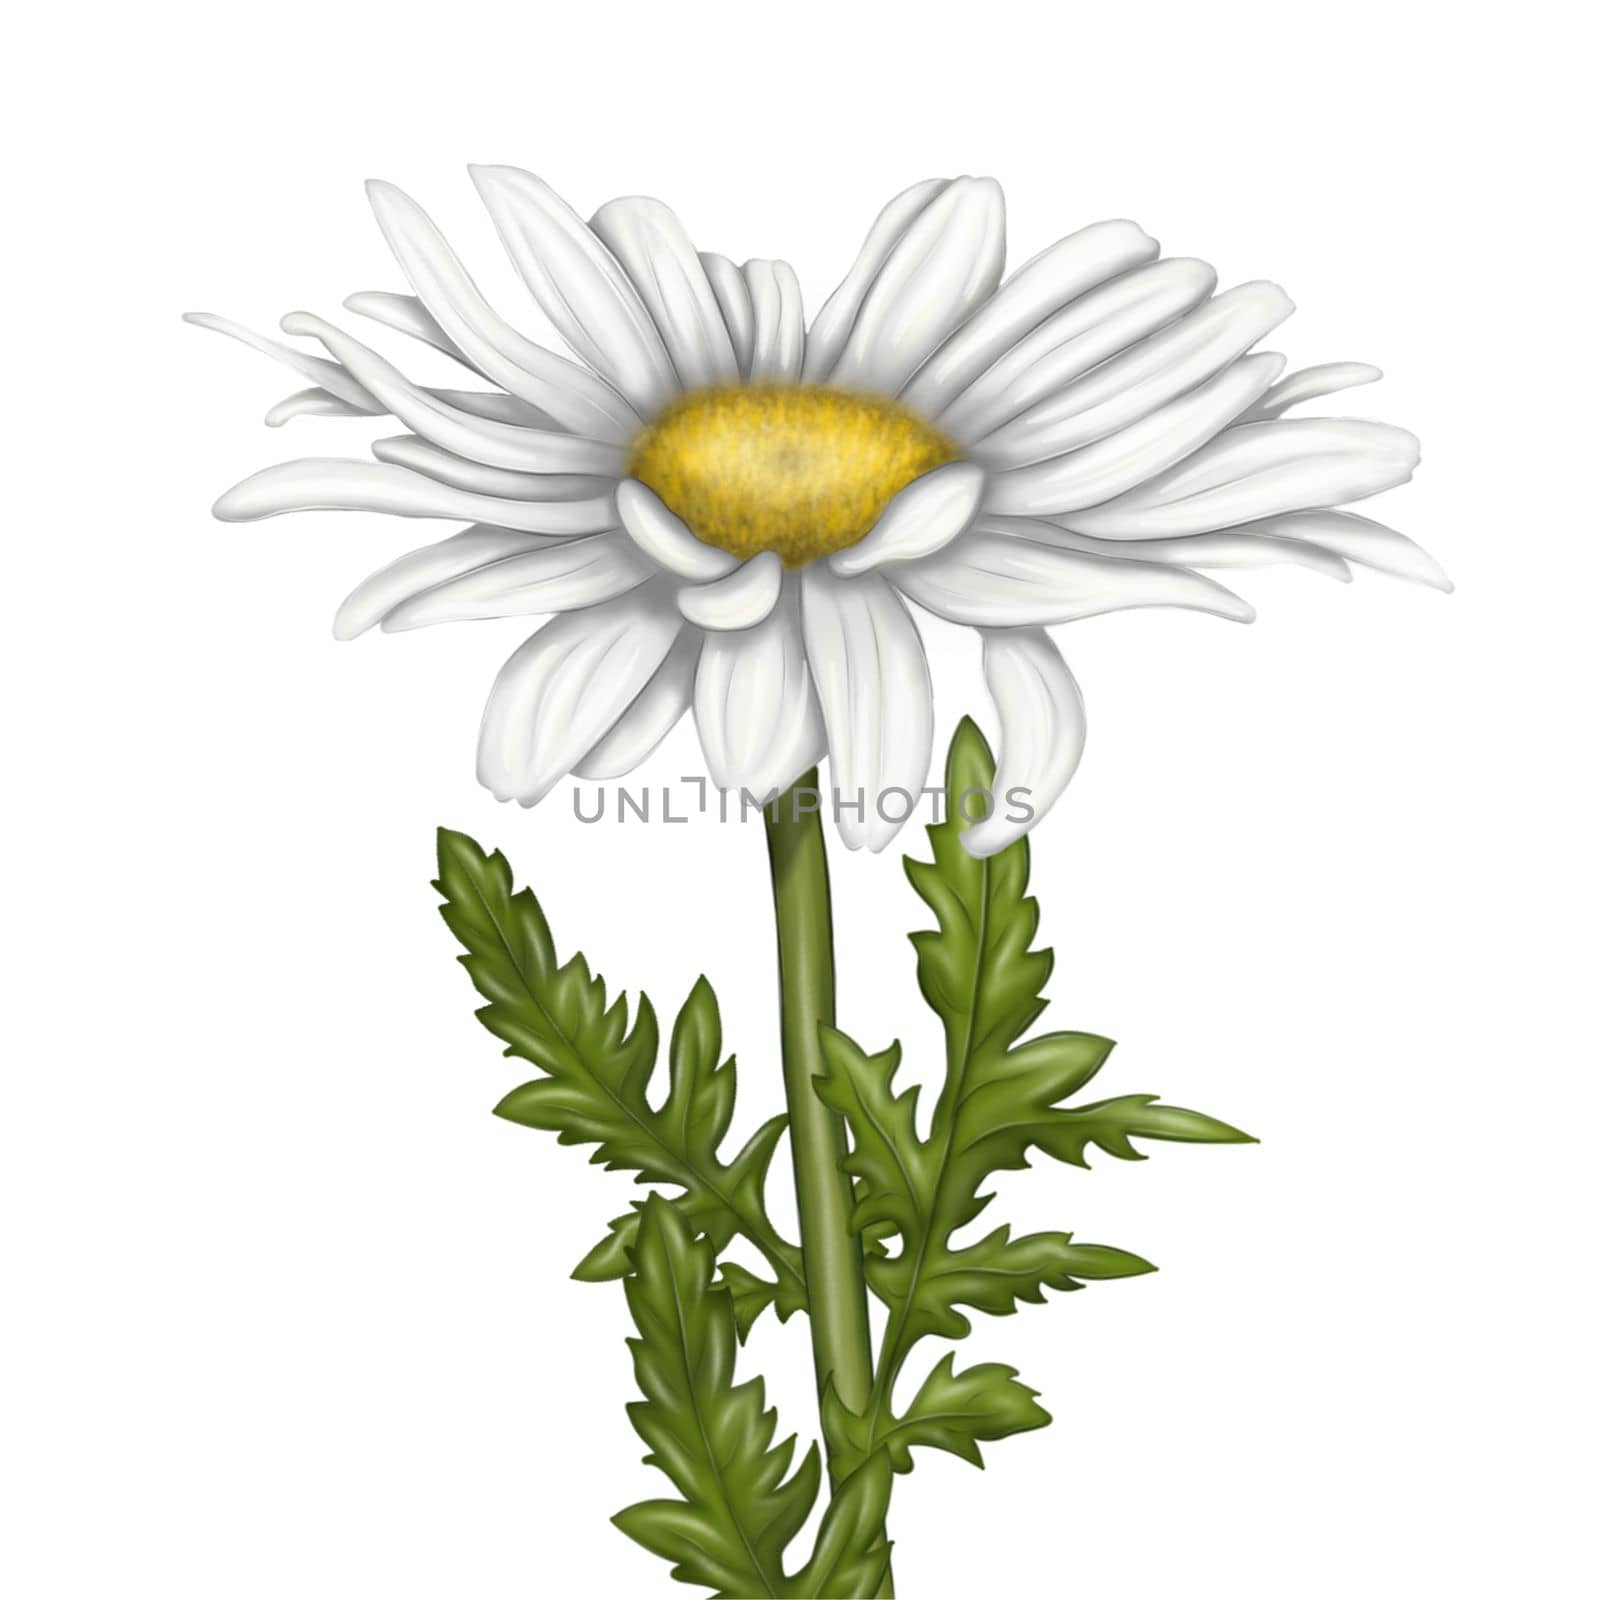 Illustration of chamomile flowers on an isolated background. Bright beautiful summer flowers. print, illustration